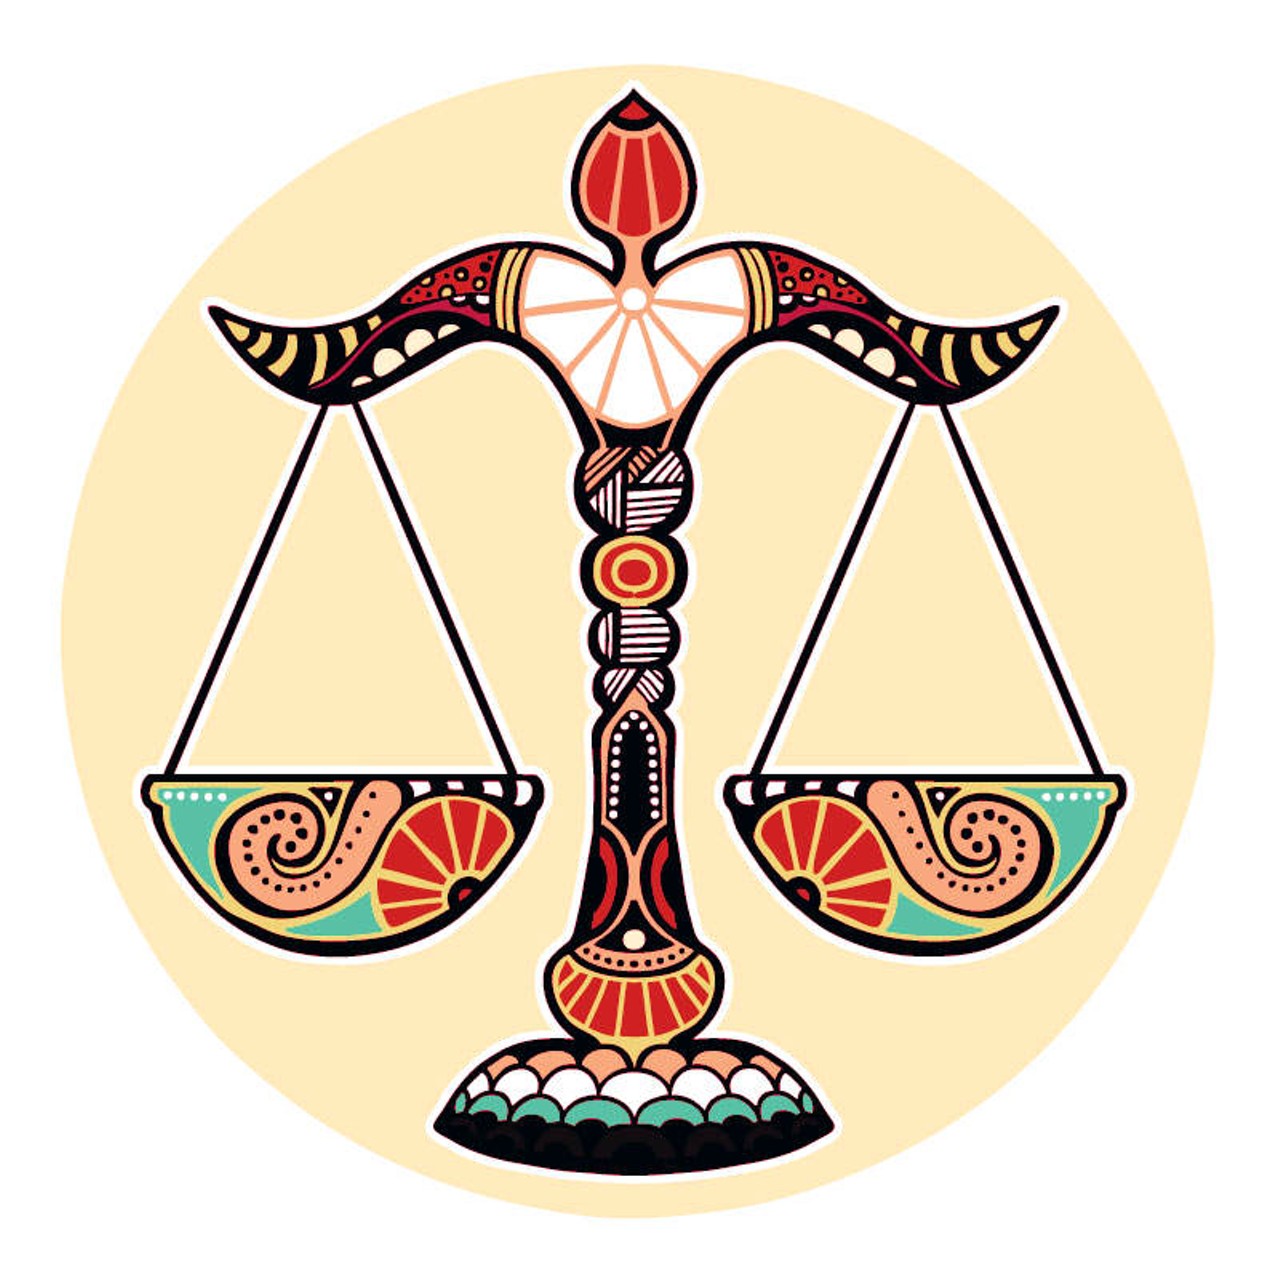 LIBRA: September 21 &#150; October 20
An old friend, or an older companion, or relative has a lot of good advice for you now. Don&#146;t let pride or convention stop you from getting back in touch. You have too much at stake to worry about how it might look if you show any sign of weakness. Those close to you can&#146;t be objective. Sometimes the only way to heal yourself is to let down your guard and allow the deeper part of you to reach out and admit that you don&#146;t have the answer. Others are more than willing to share but you need to be willing to get over yourself before they deign to let you in on their secrets.